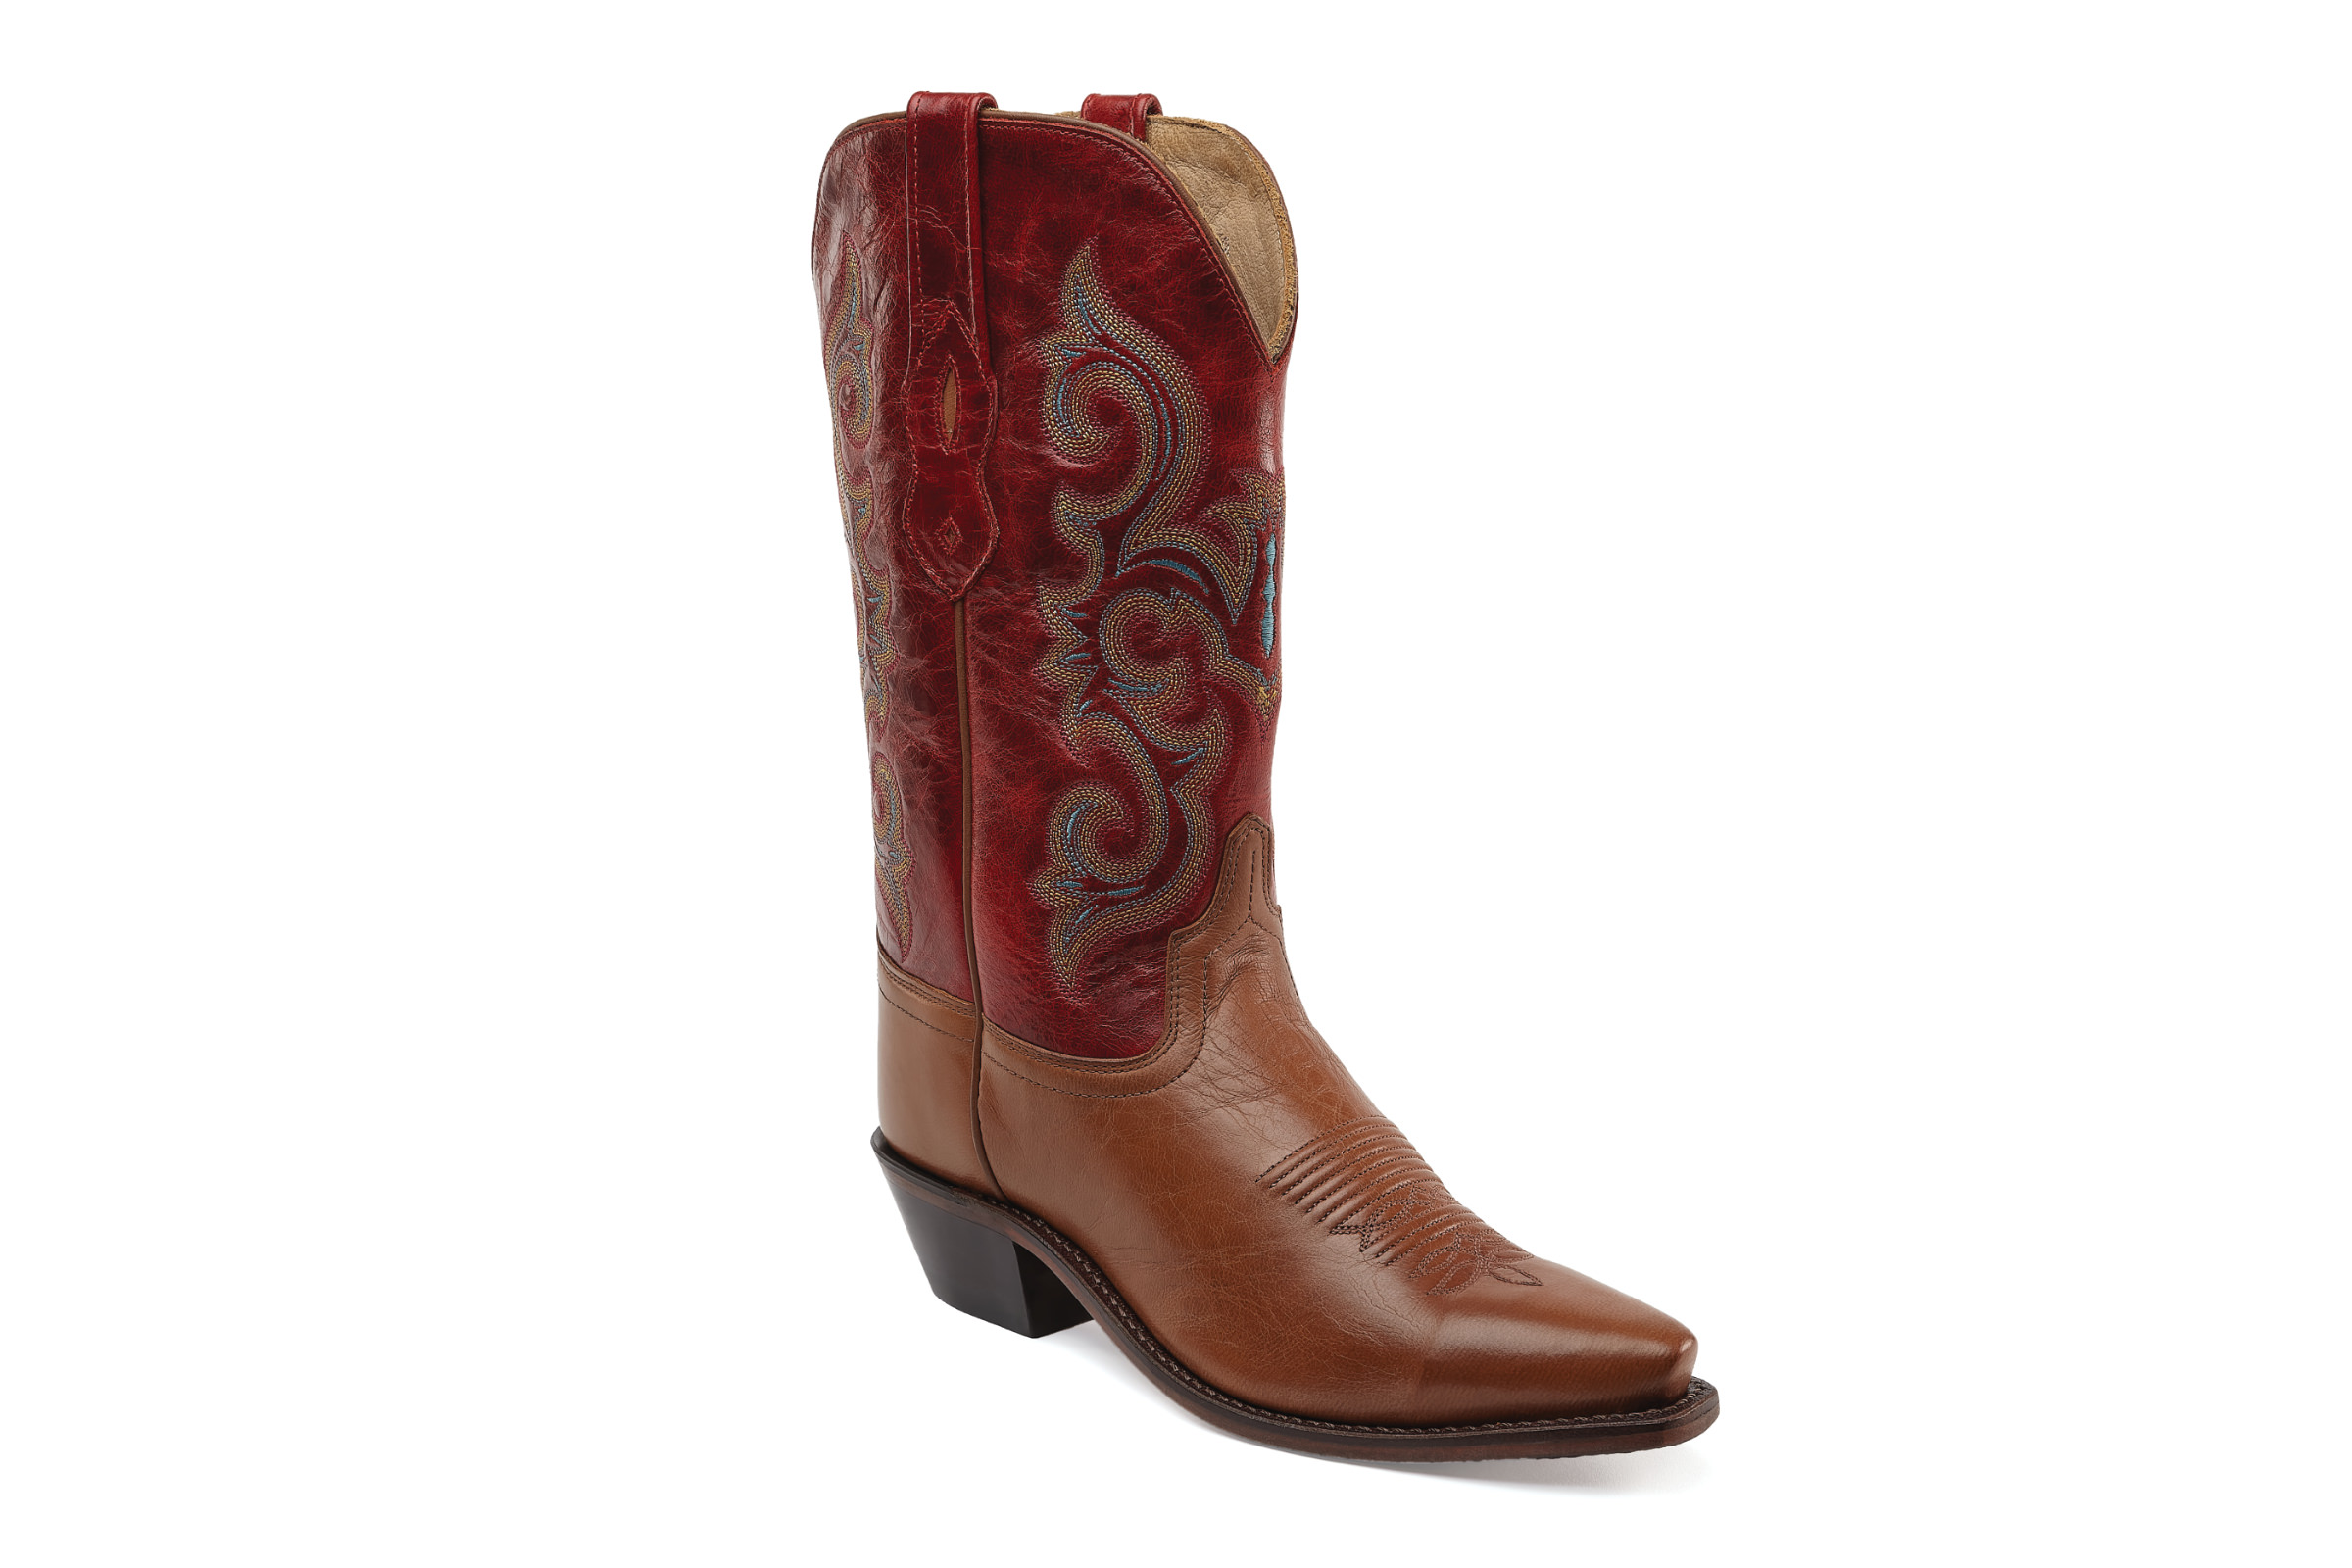 Ladies cowboy boots LF1628E, Belcourt, brown/red